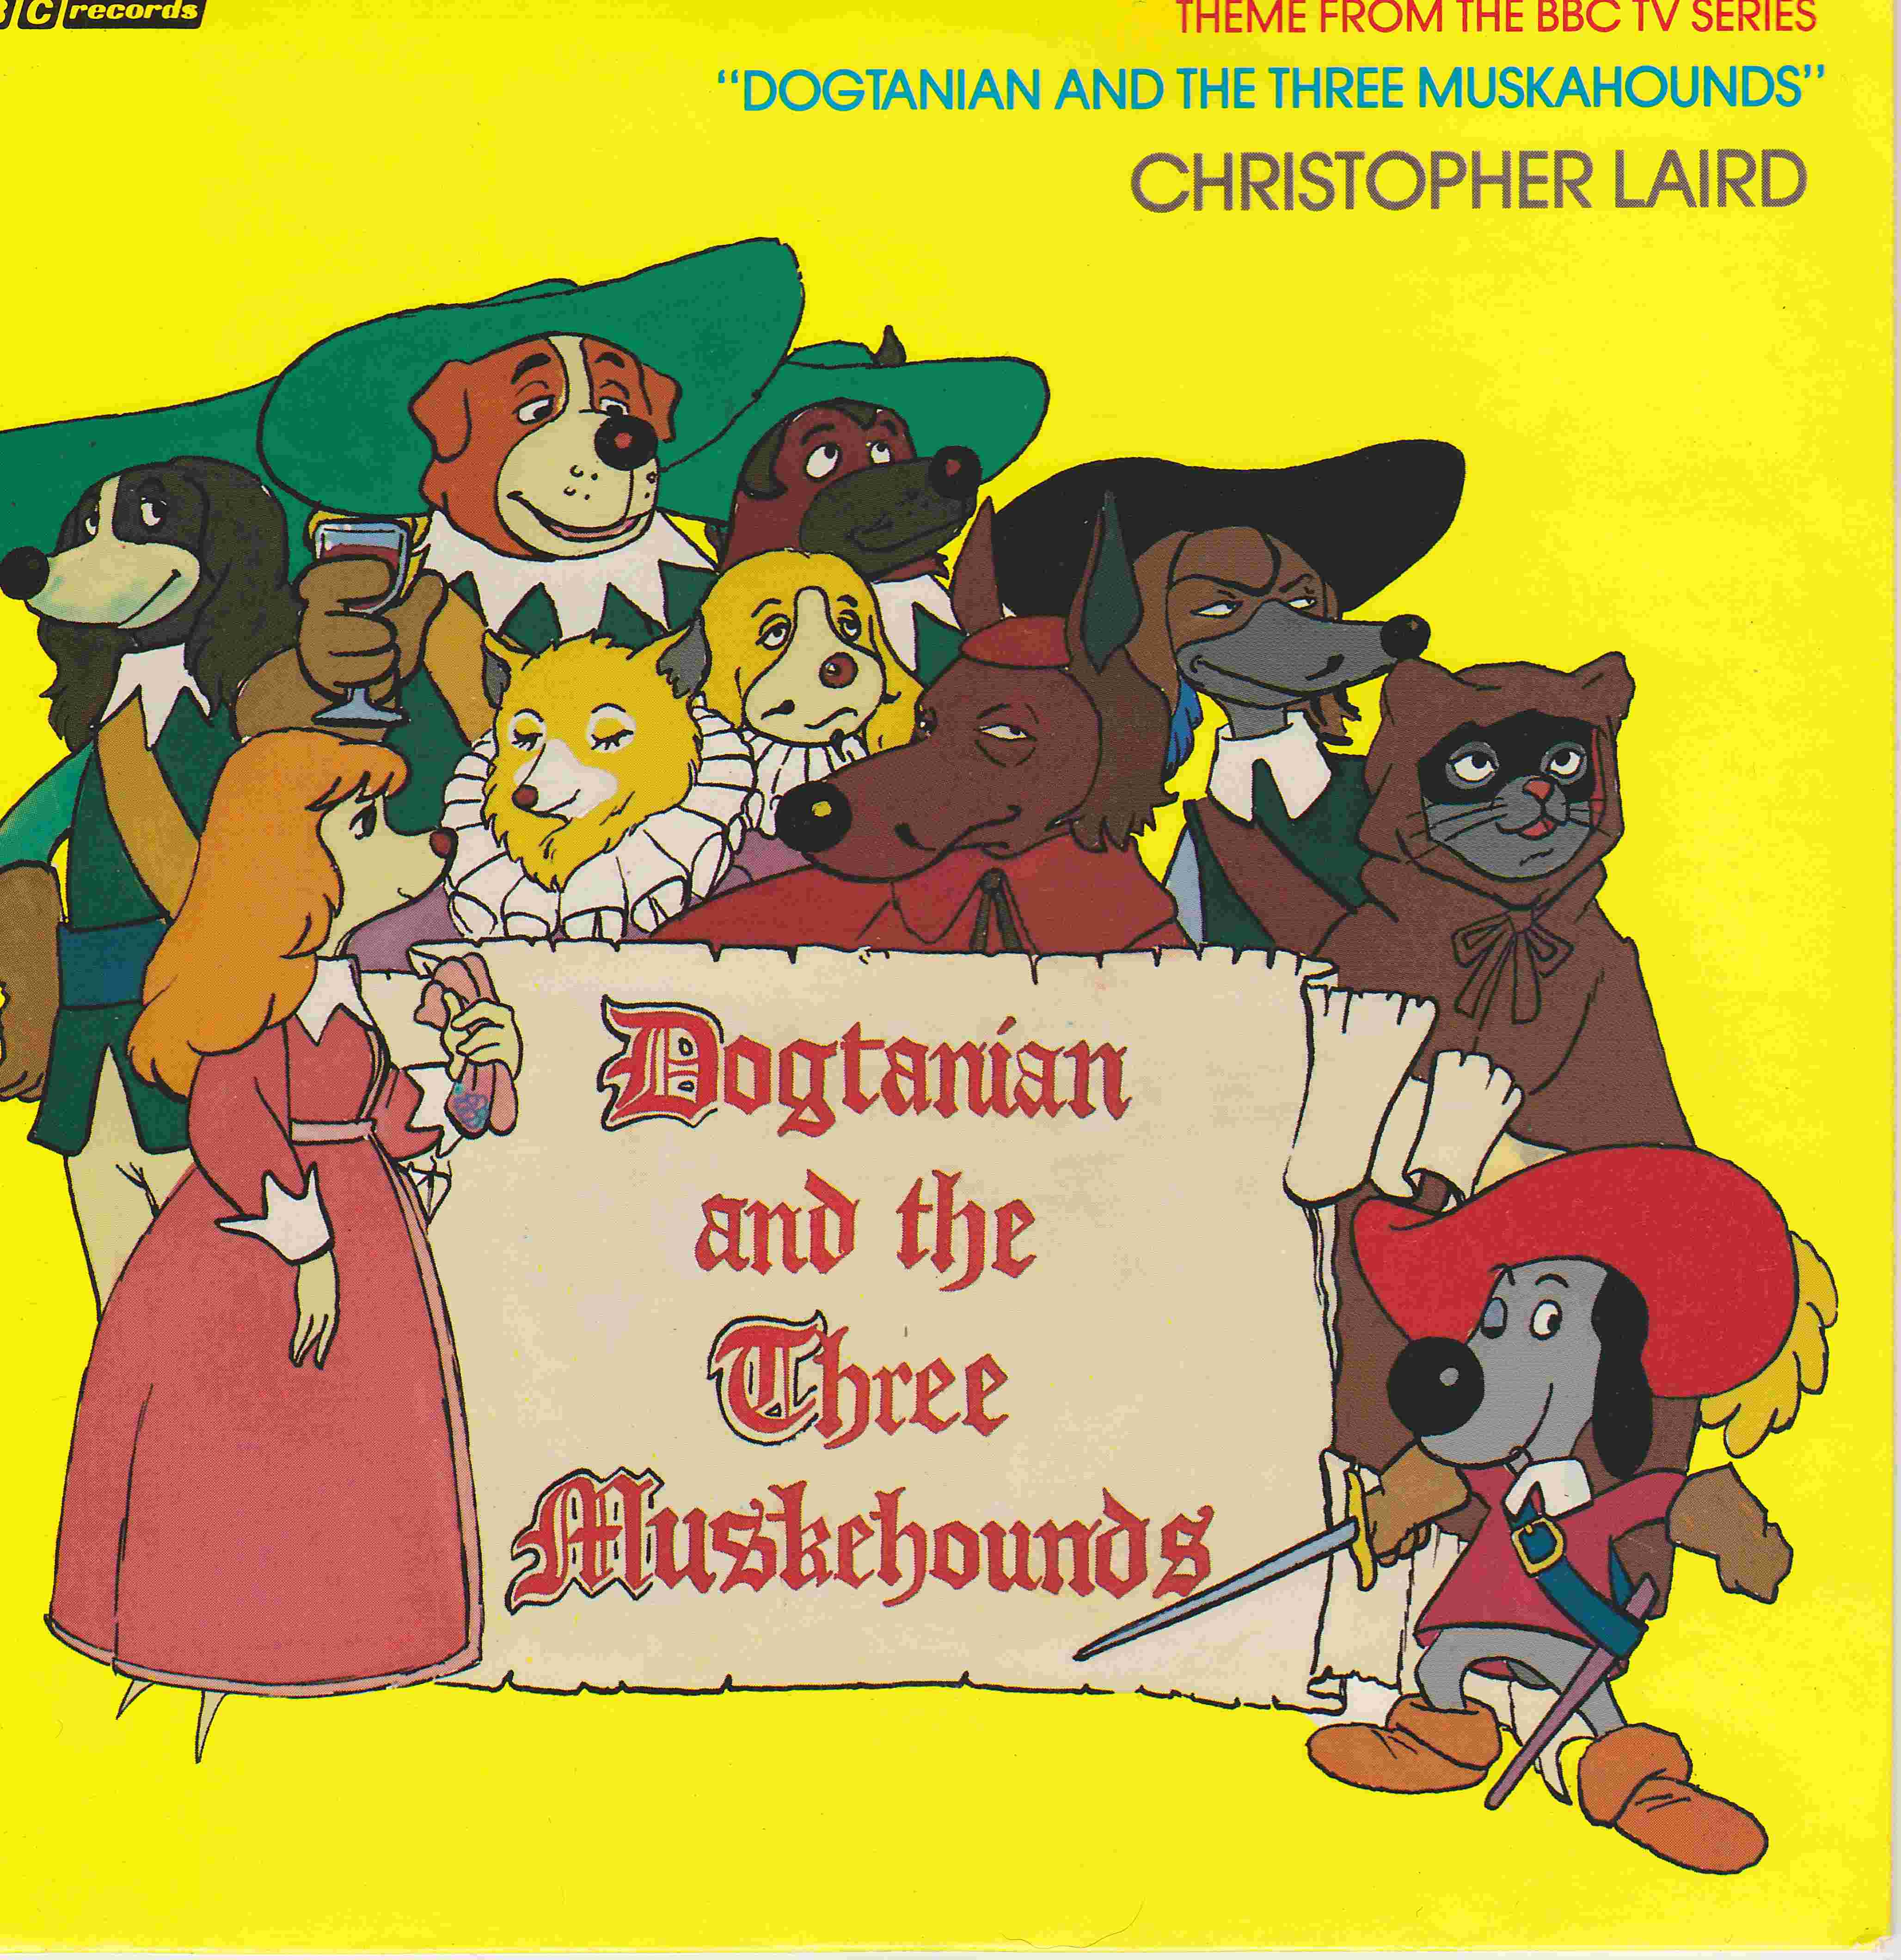 Picture of RESL 165 Dogtanian and the three muskehounds by artist Christopher Laird / G \& M Orchestra from the BBC records and Tapes library